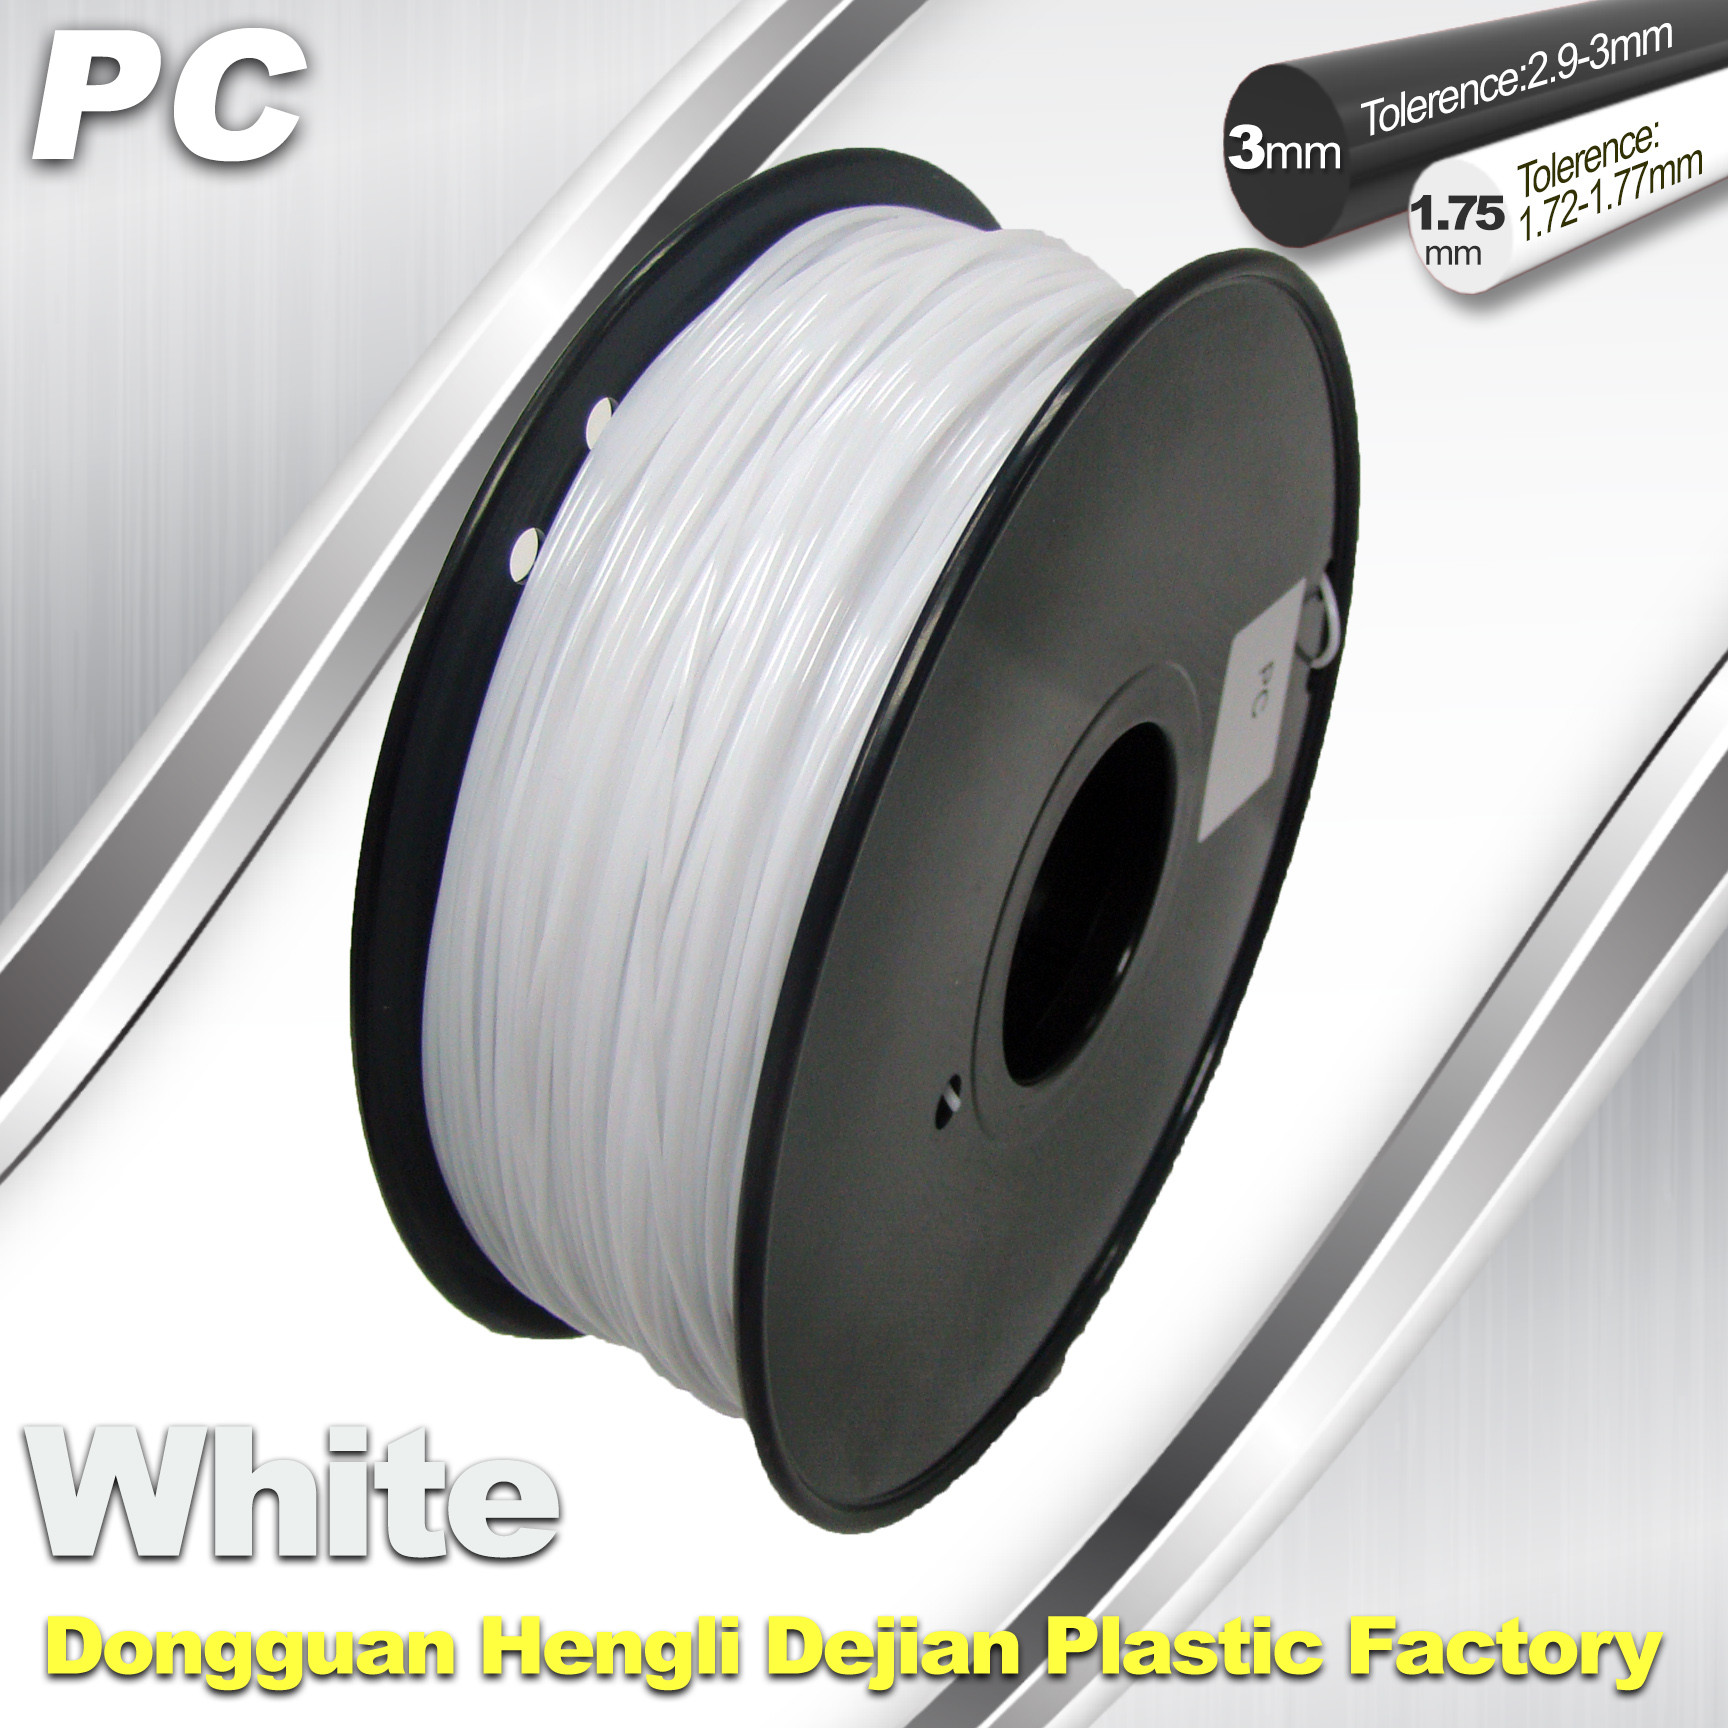 Wholesale 1.75 / 3.0 mm  PC Filament  White for 3d Printer Filament from china suppliers